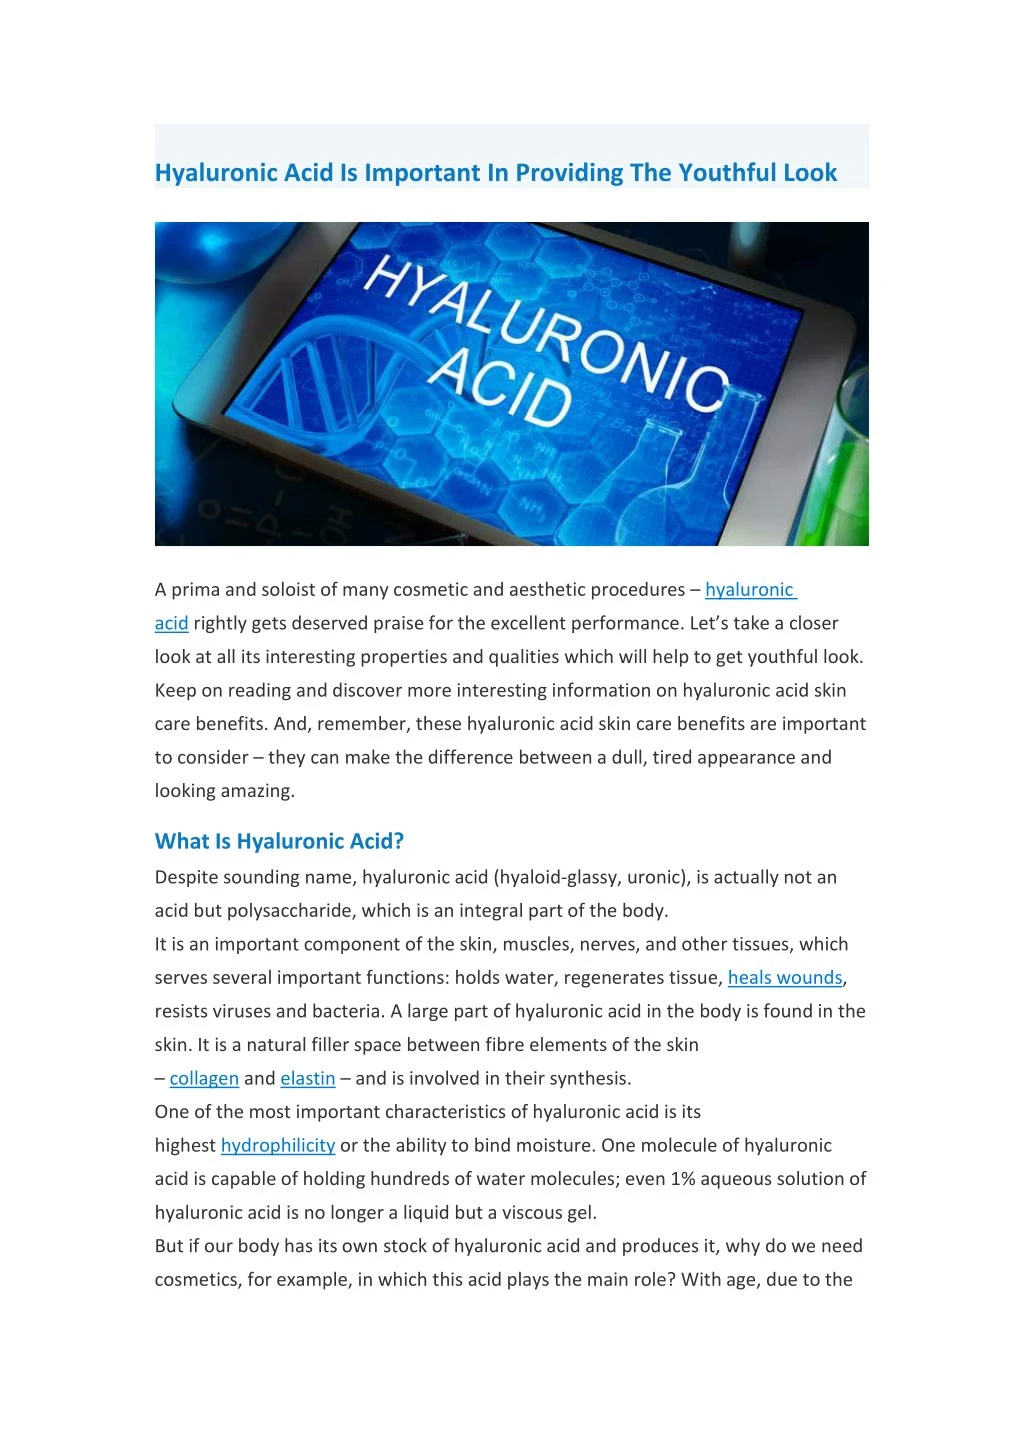 hyaluronic acid is important in providing